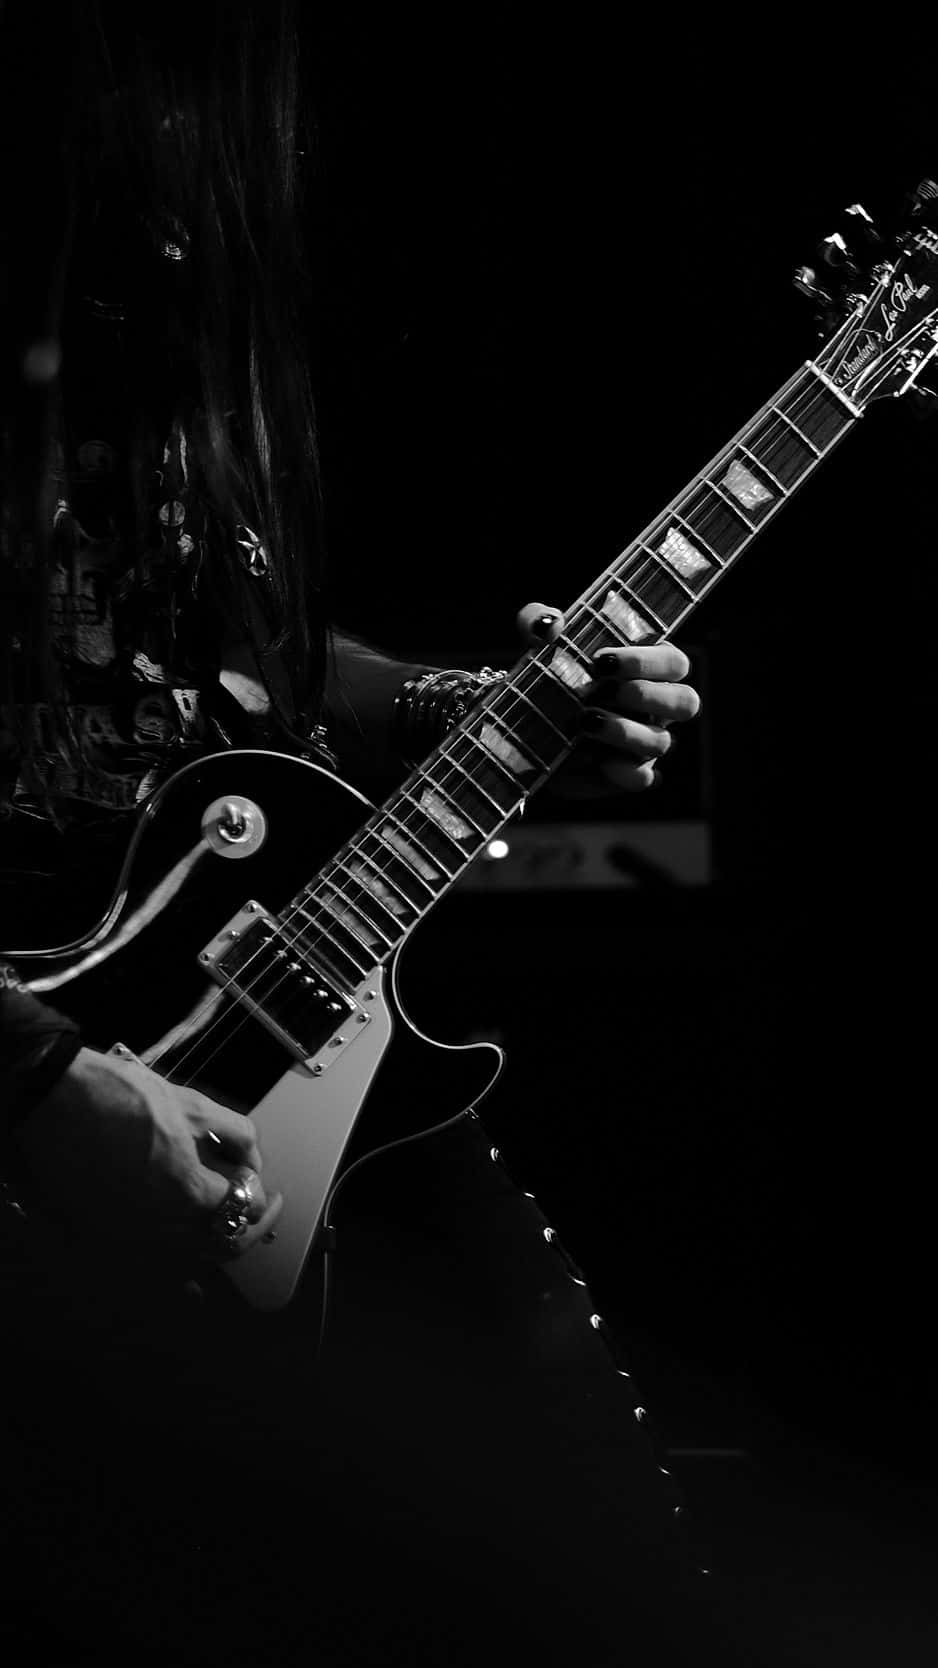 Black And White Electric Guitar Aesthetic Wallpaper